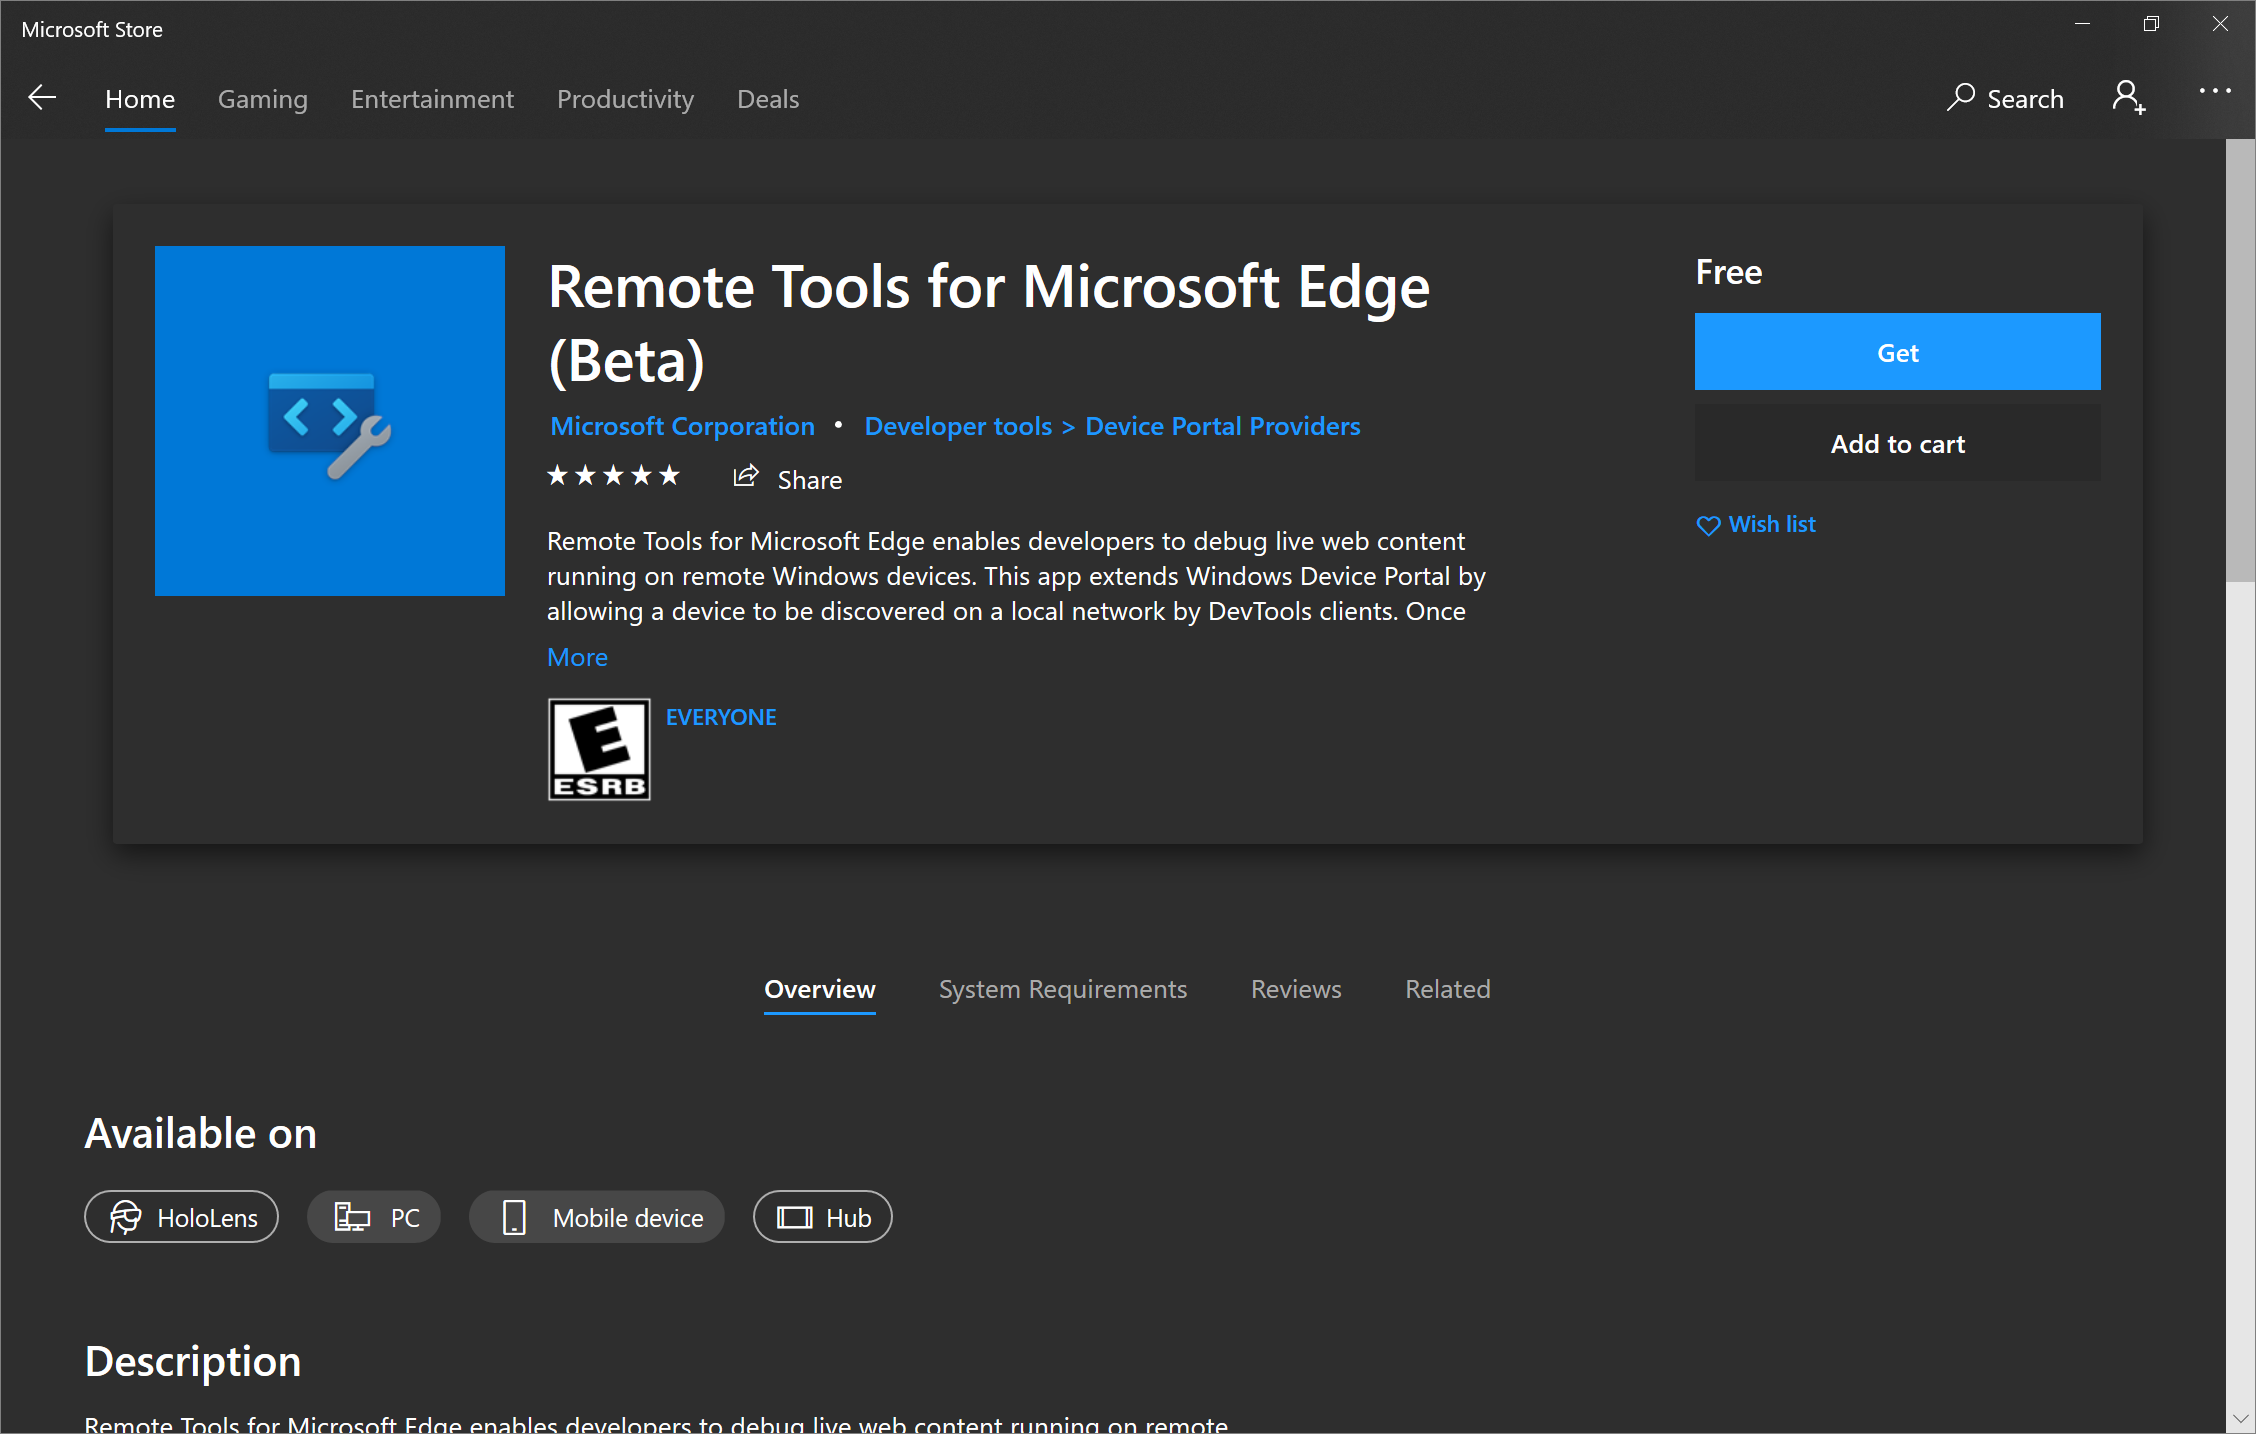 The Remote Tools for Microsoft Edge (Beta) app available in the Microsoft Store.